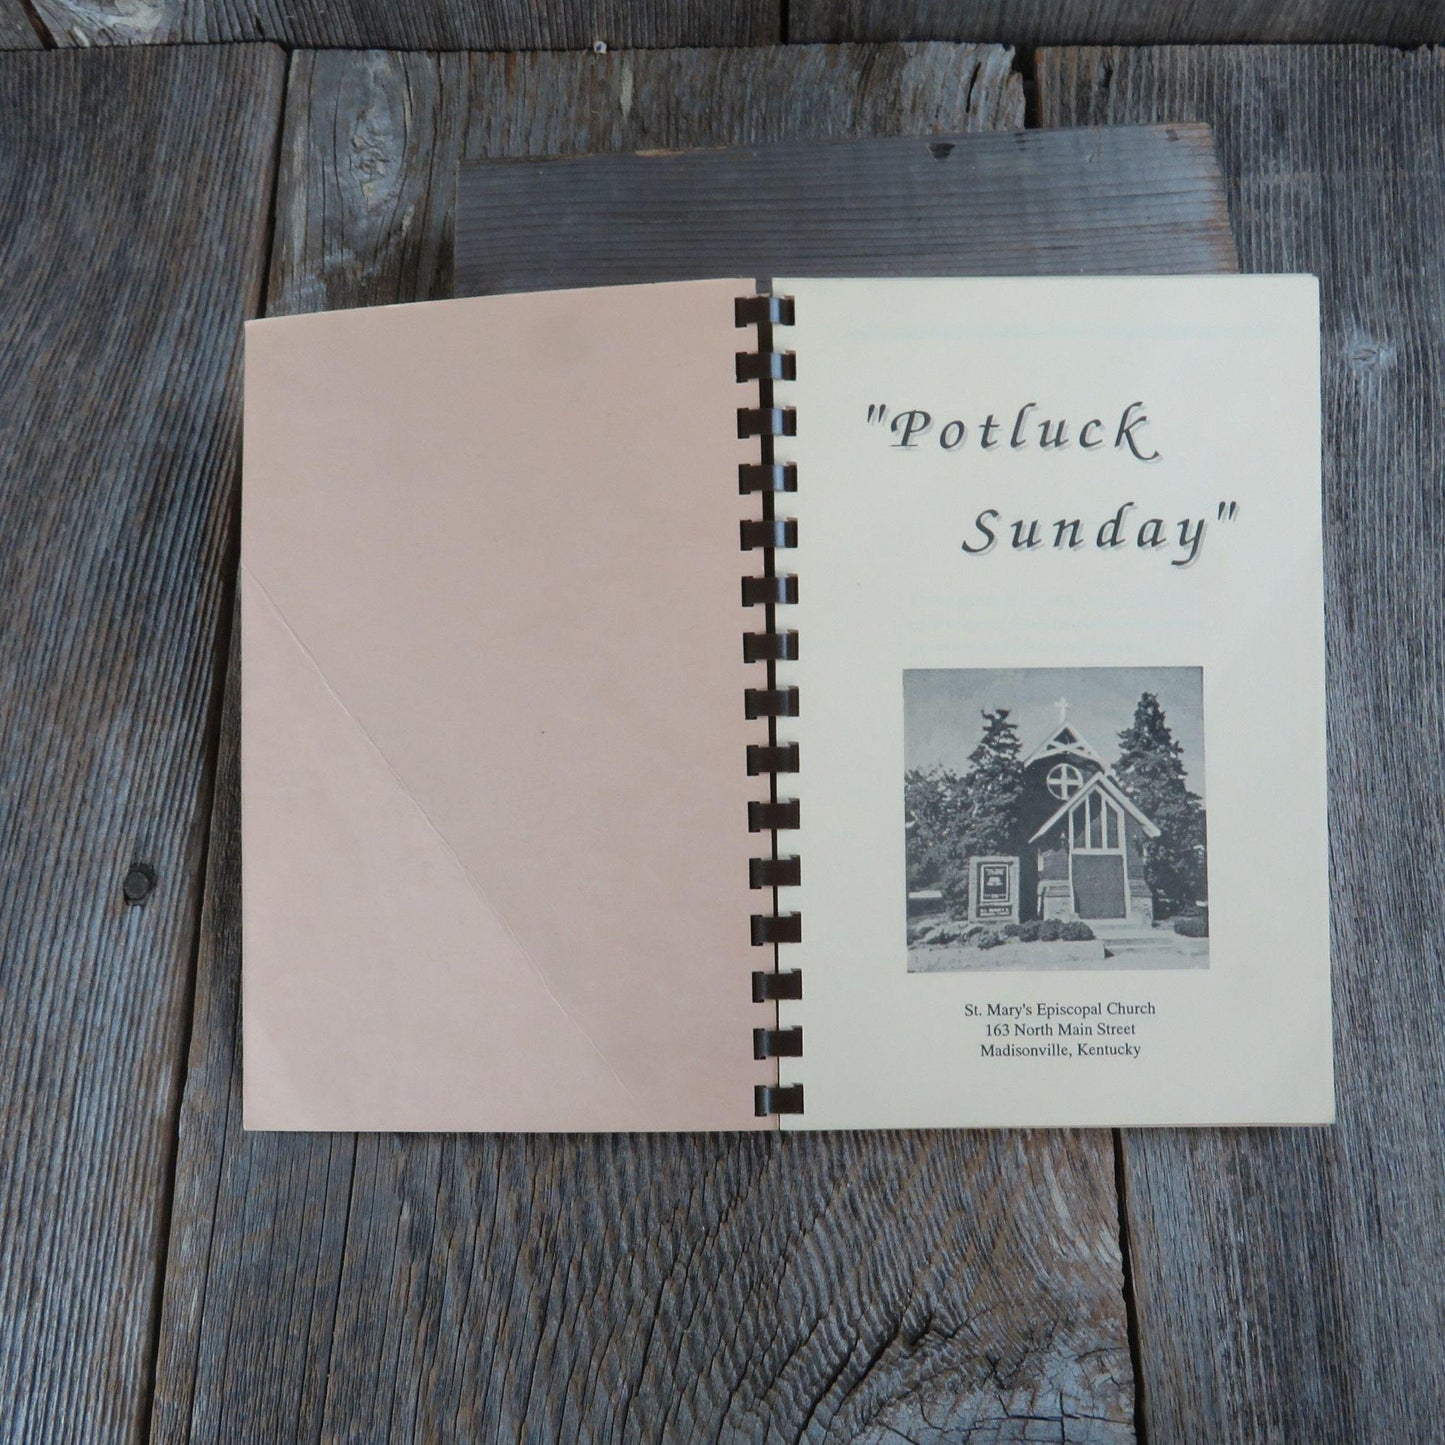 Vintage Kentucky Church Cookbook Madisonville St. Mary's Episcopal Potluck 1992 - At Grandma's Table